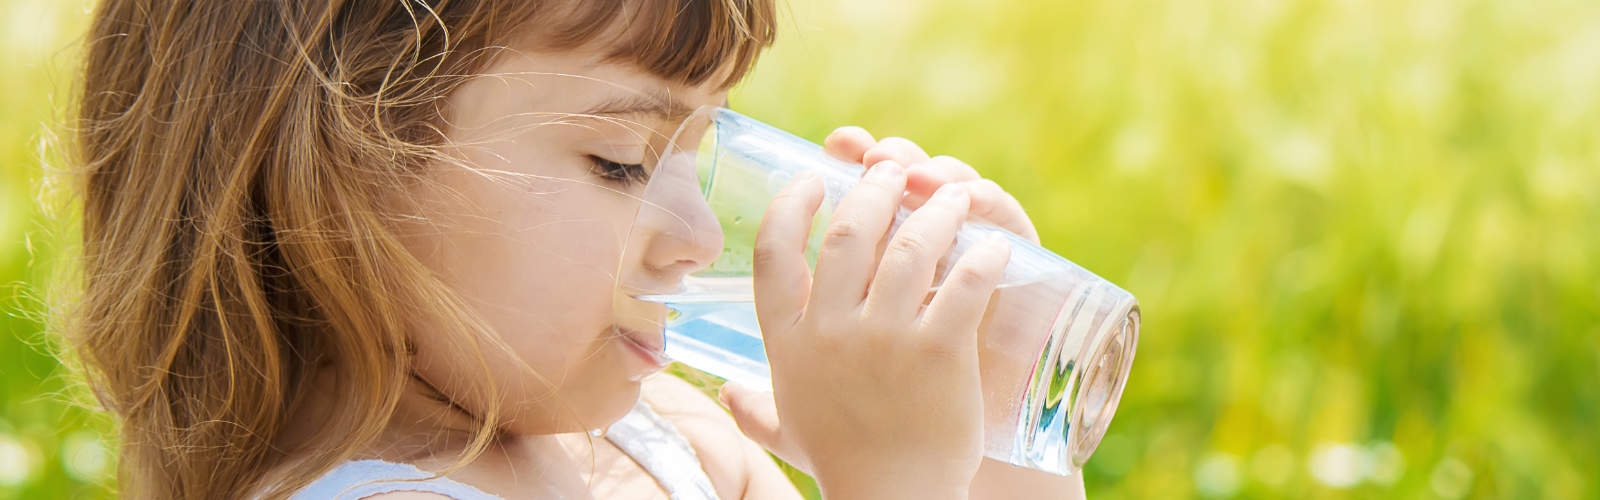 Girl drinking glass of water outdoors in green field.